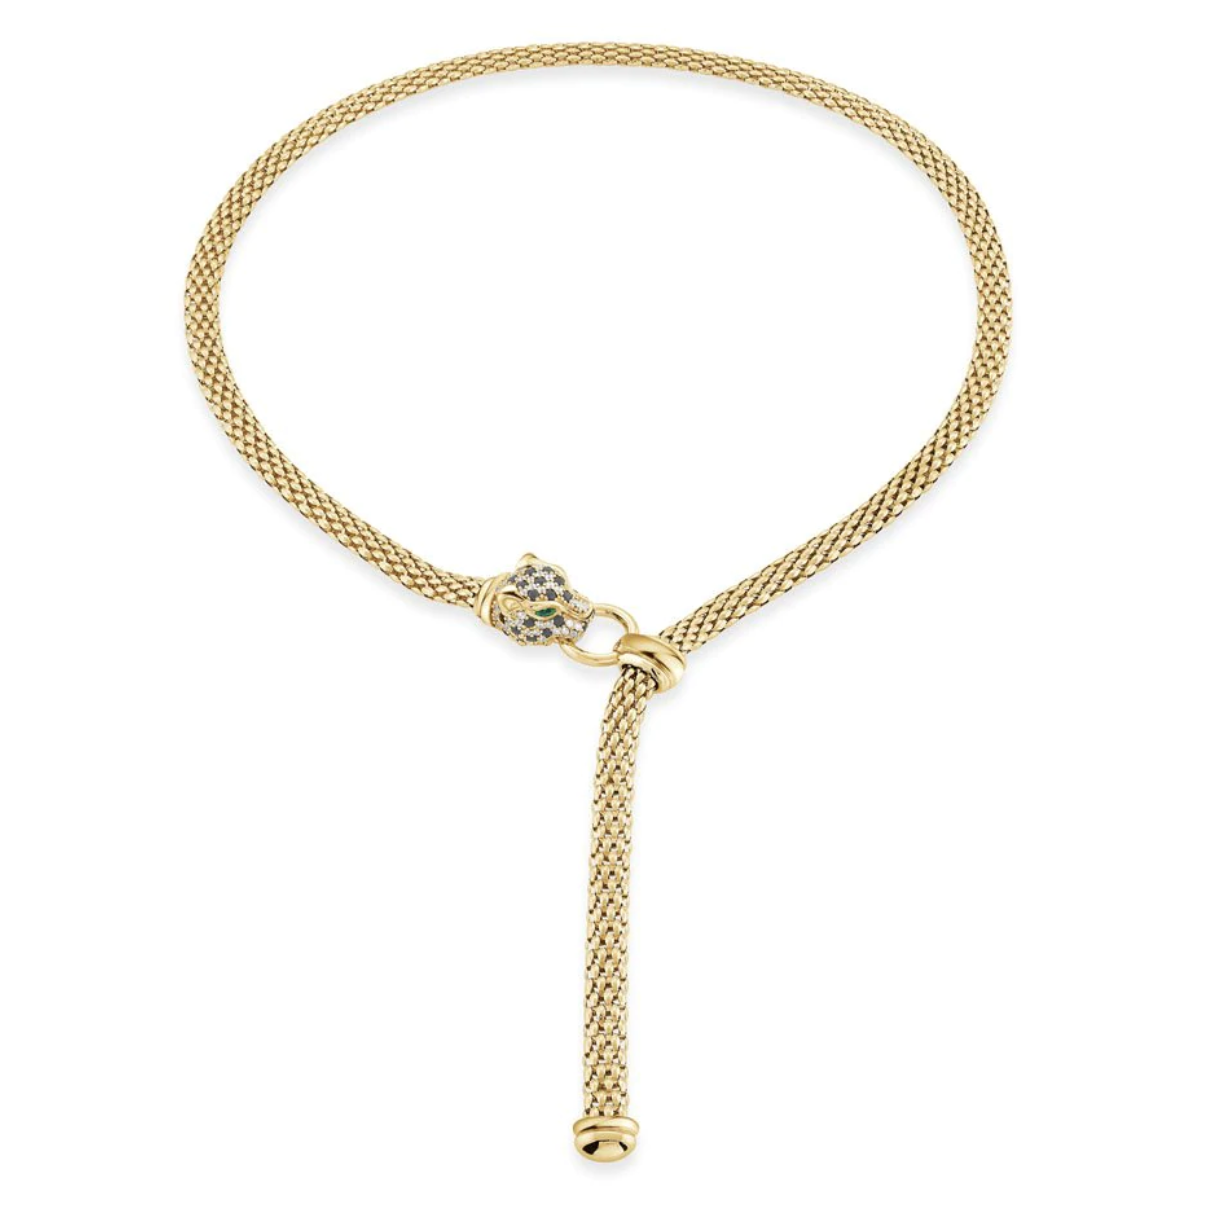 YELLOW GOLD SNAKE MESH NECKLACE